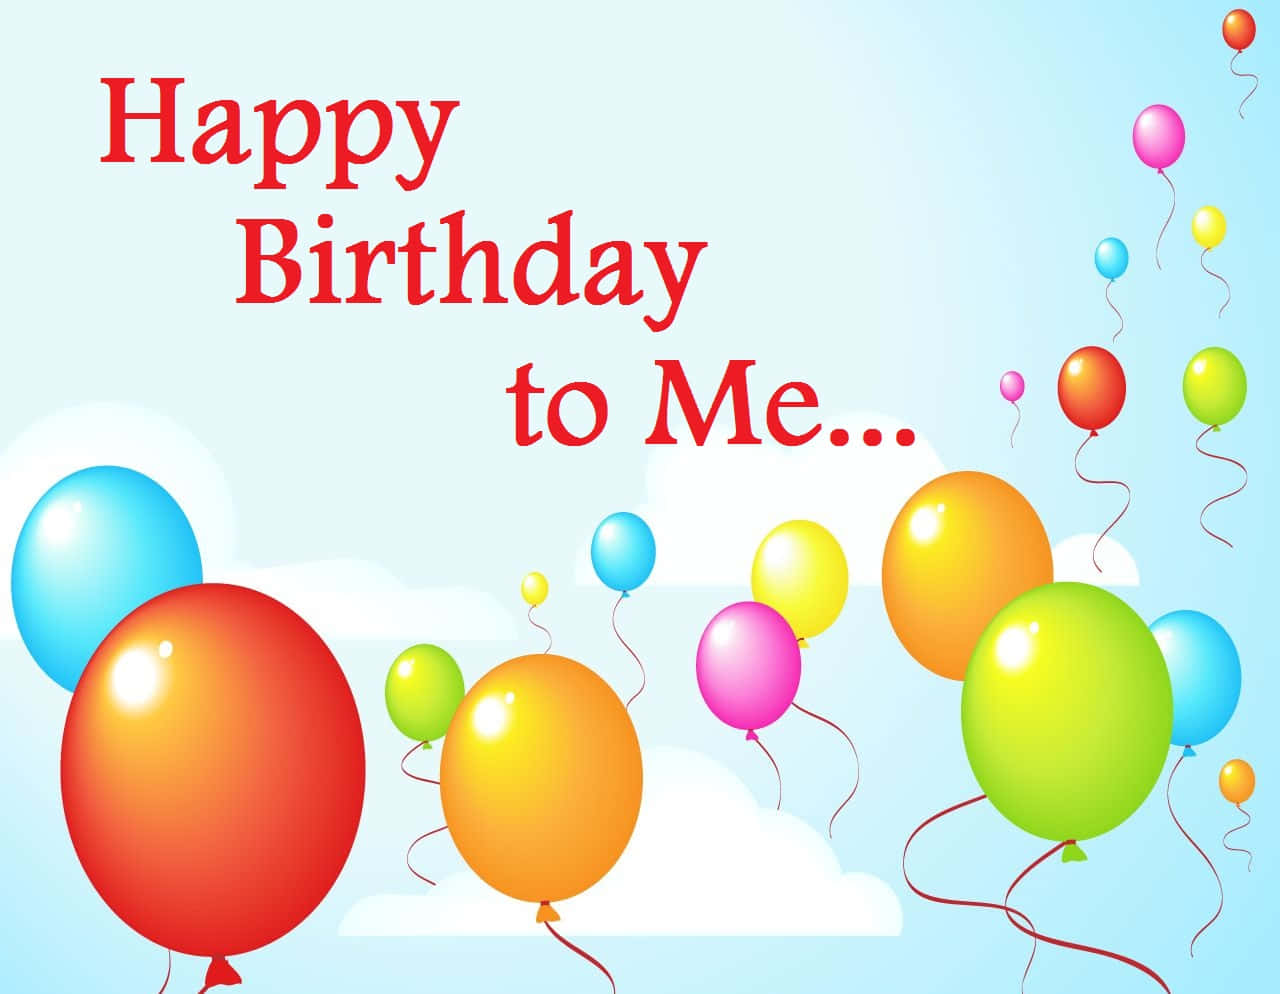 Today marks the day of celebration. It's my birthday and I'm feeling great.